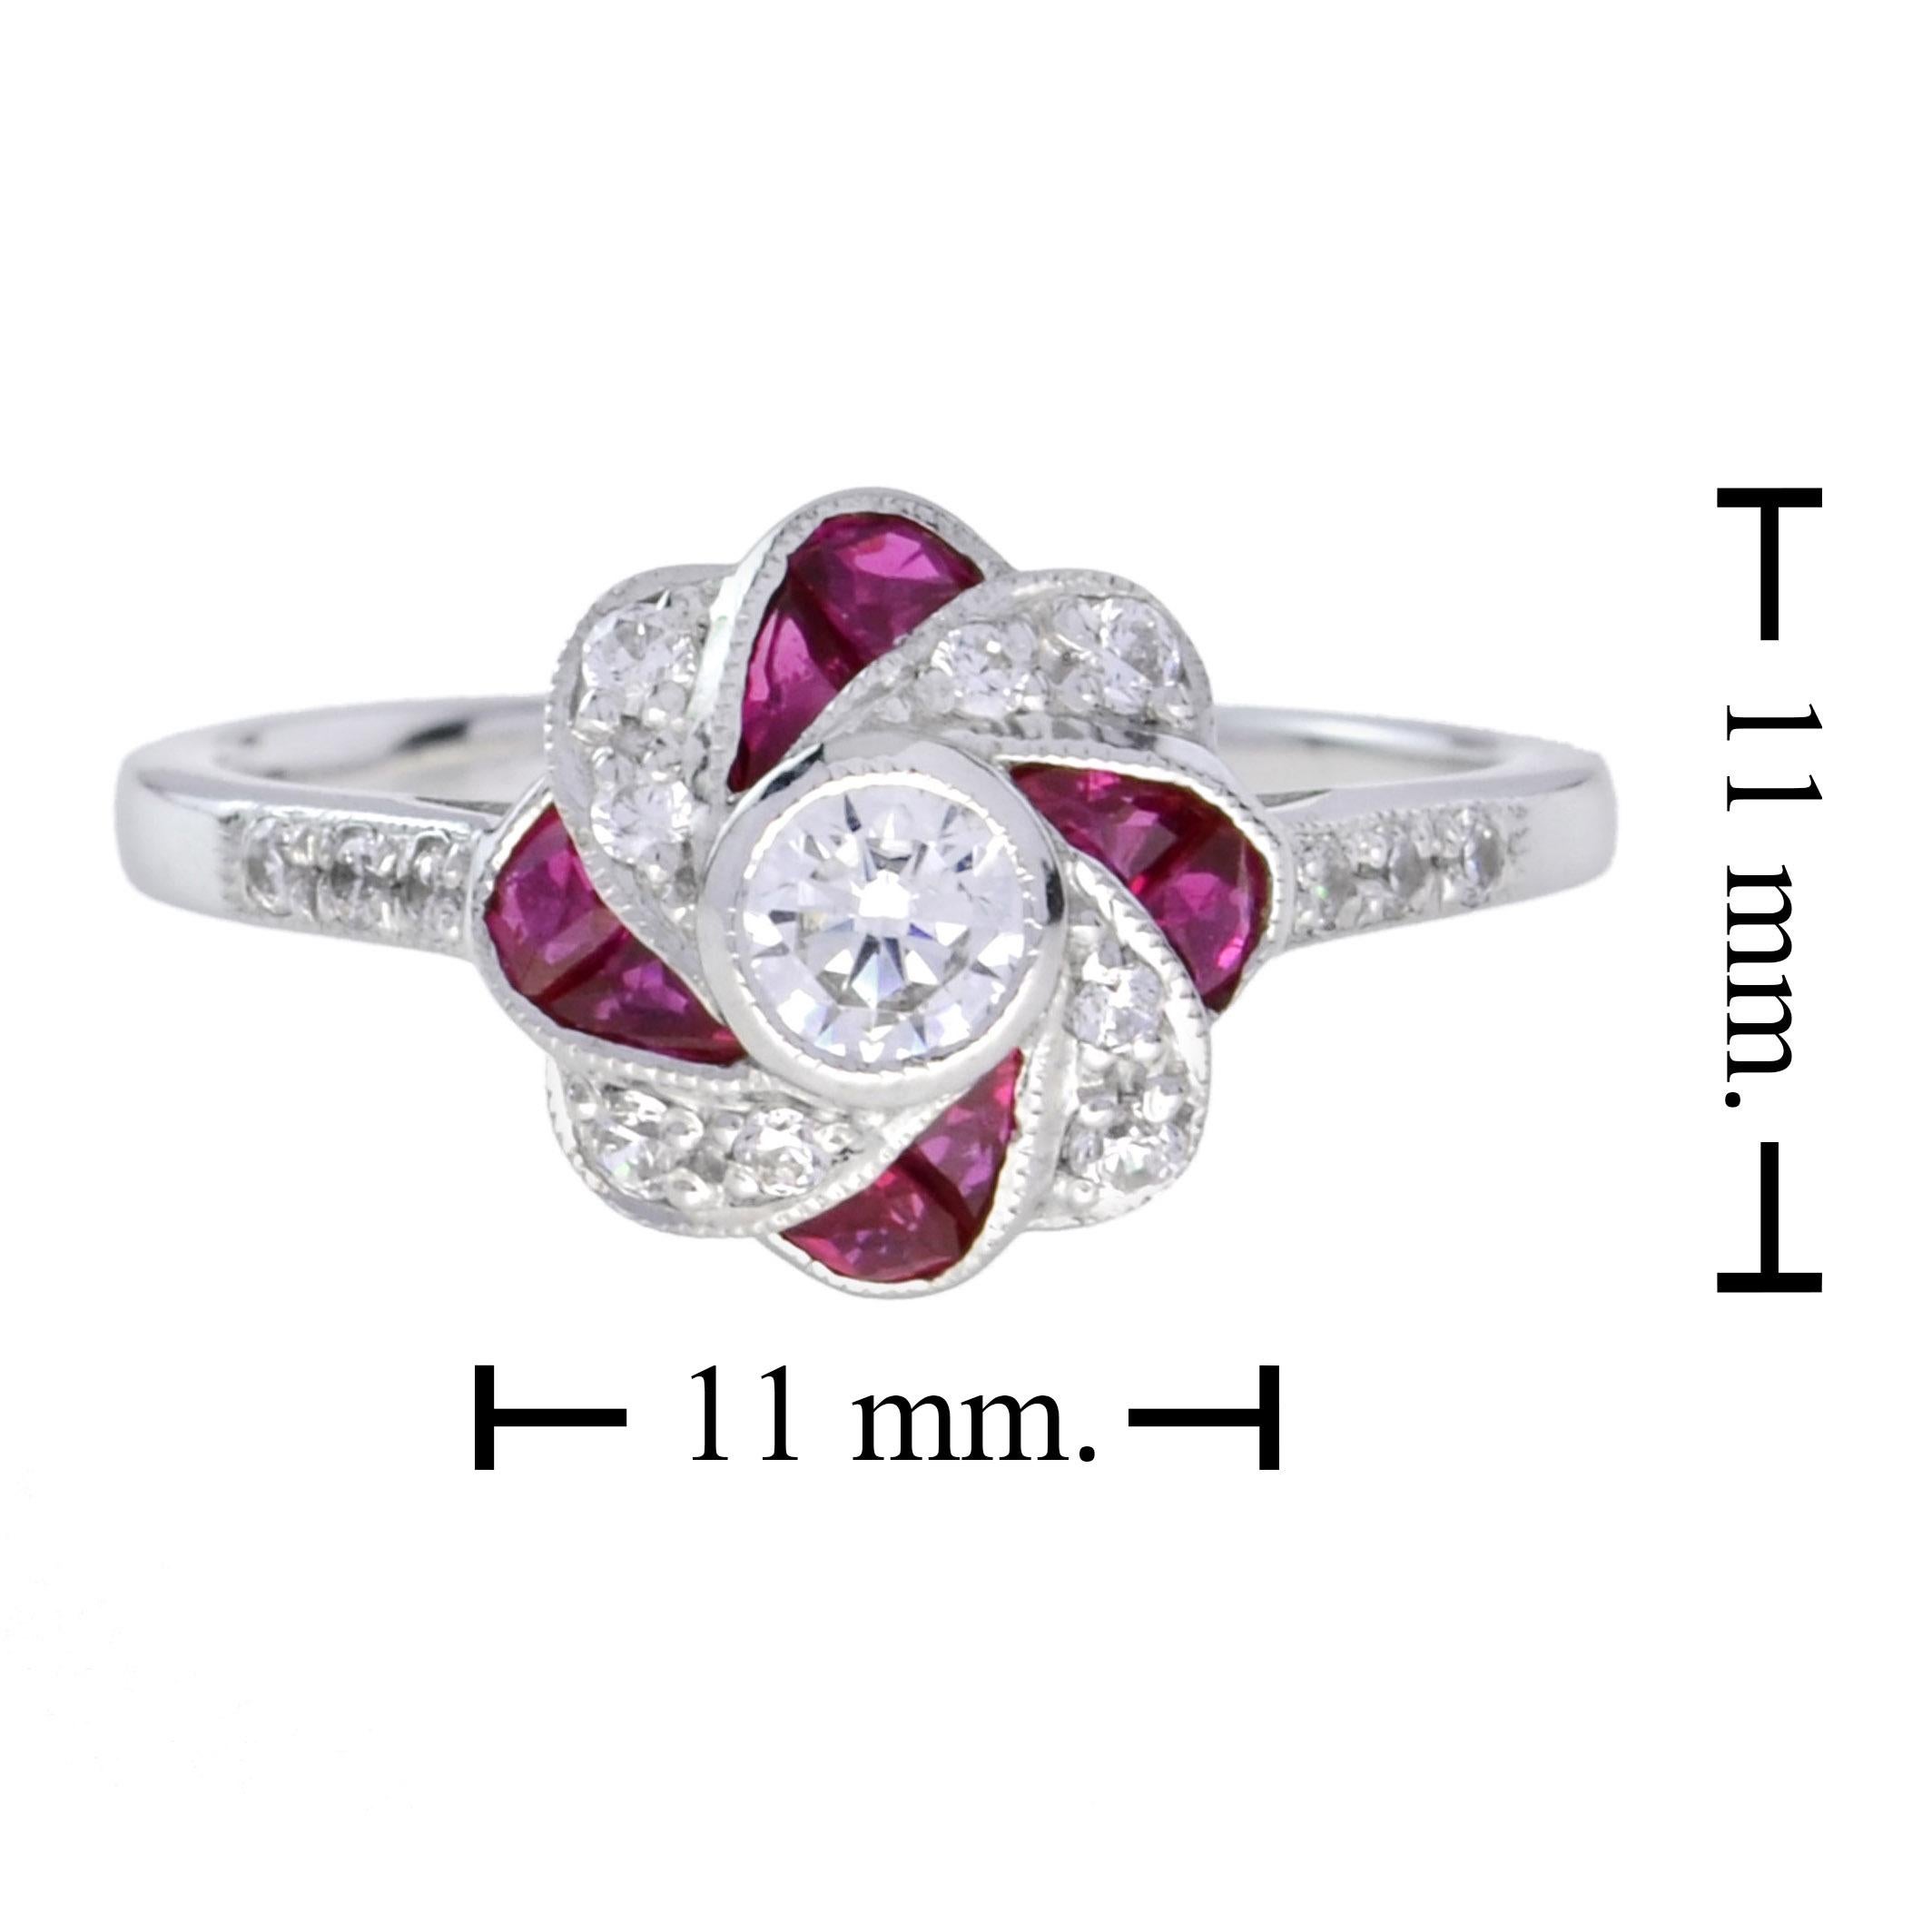 For Sale:  Art Deco Style Diamond and Ruby Floral Engagement Ring in 18K White Gold 7